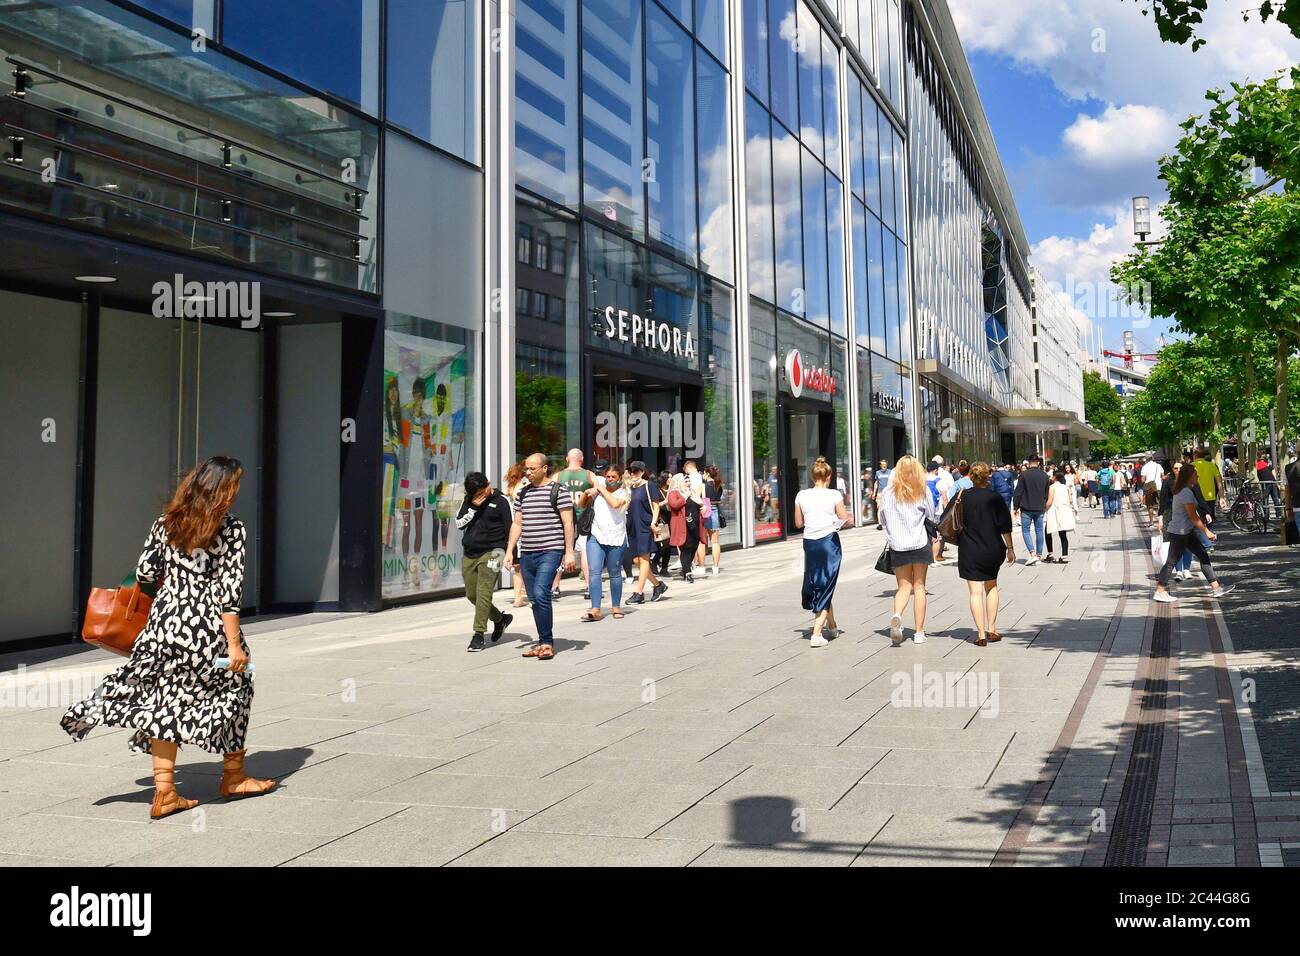 Frankfurt am Main, Germany - June 2020: Shopping street called 'Zeil' on a sunny day full of people in modern Frankfurt city center Stock Photo